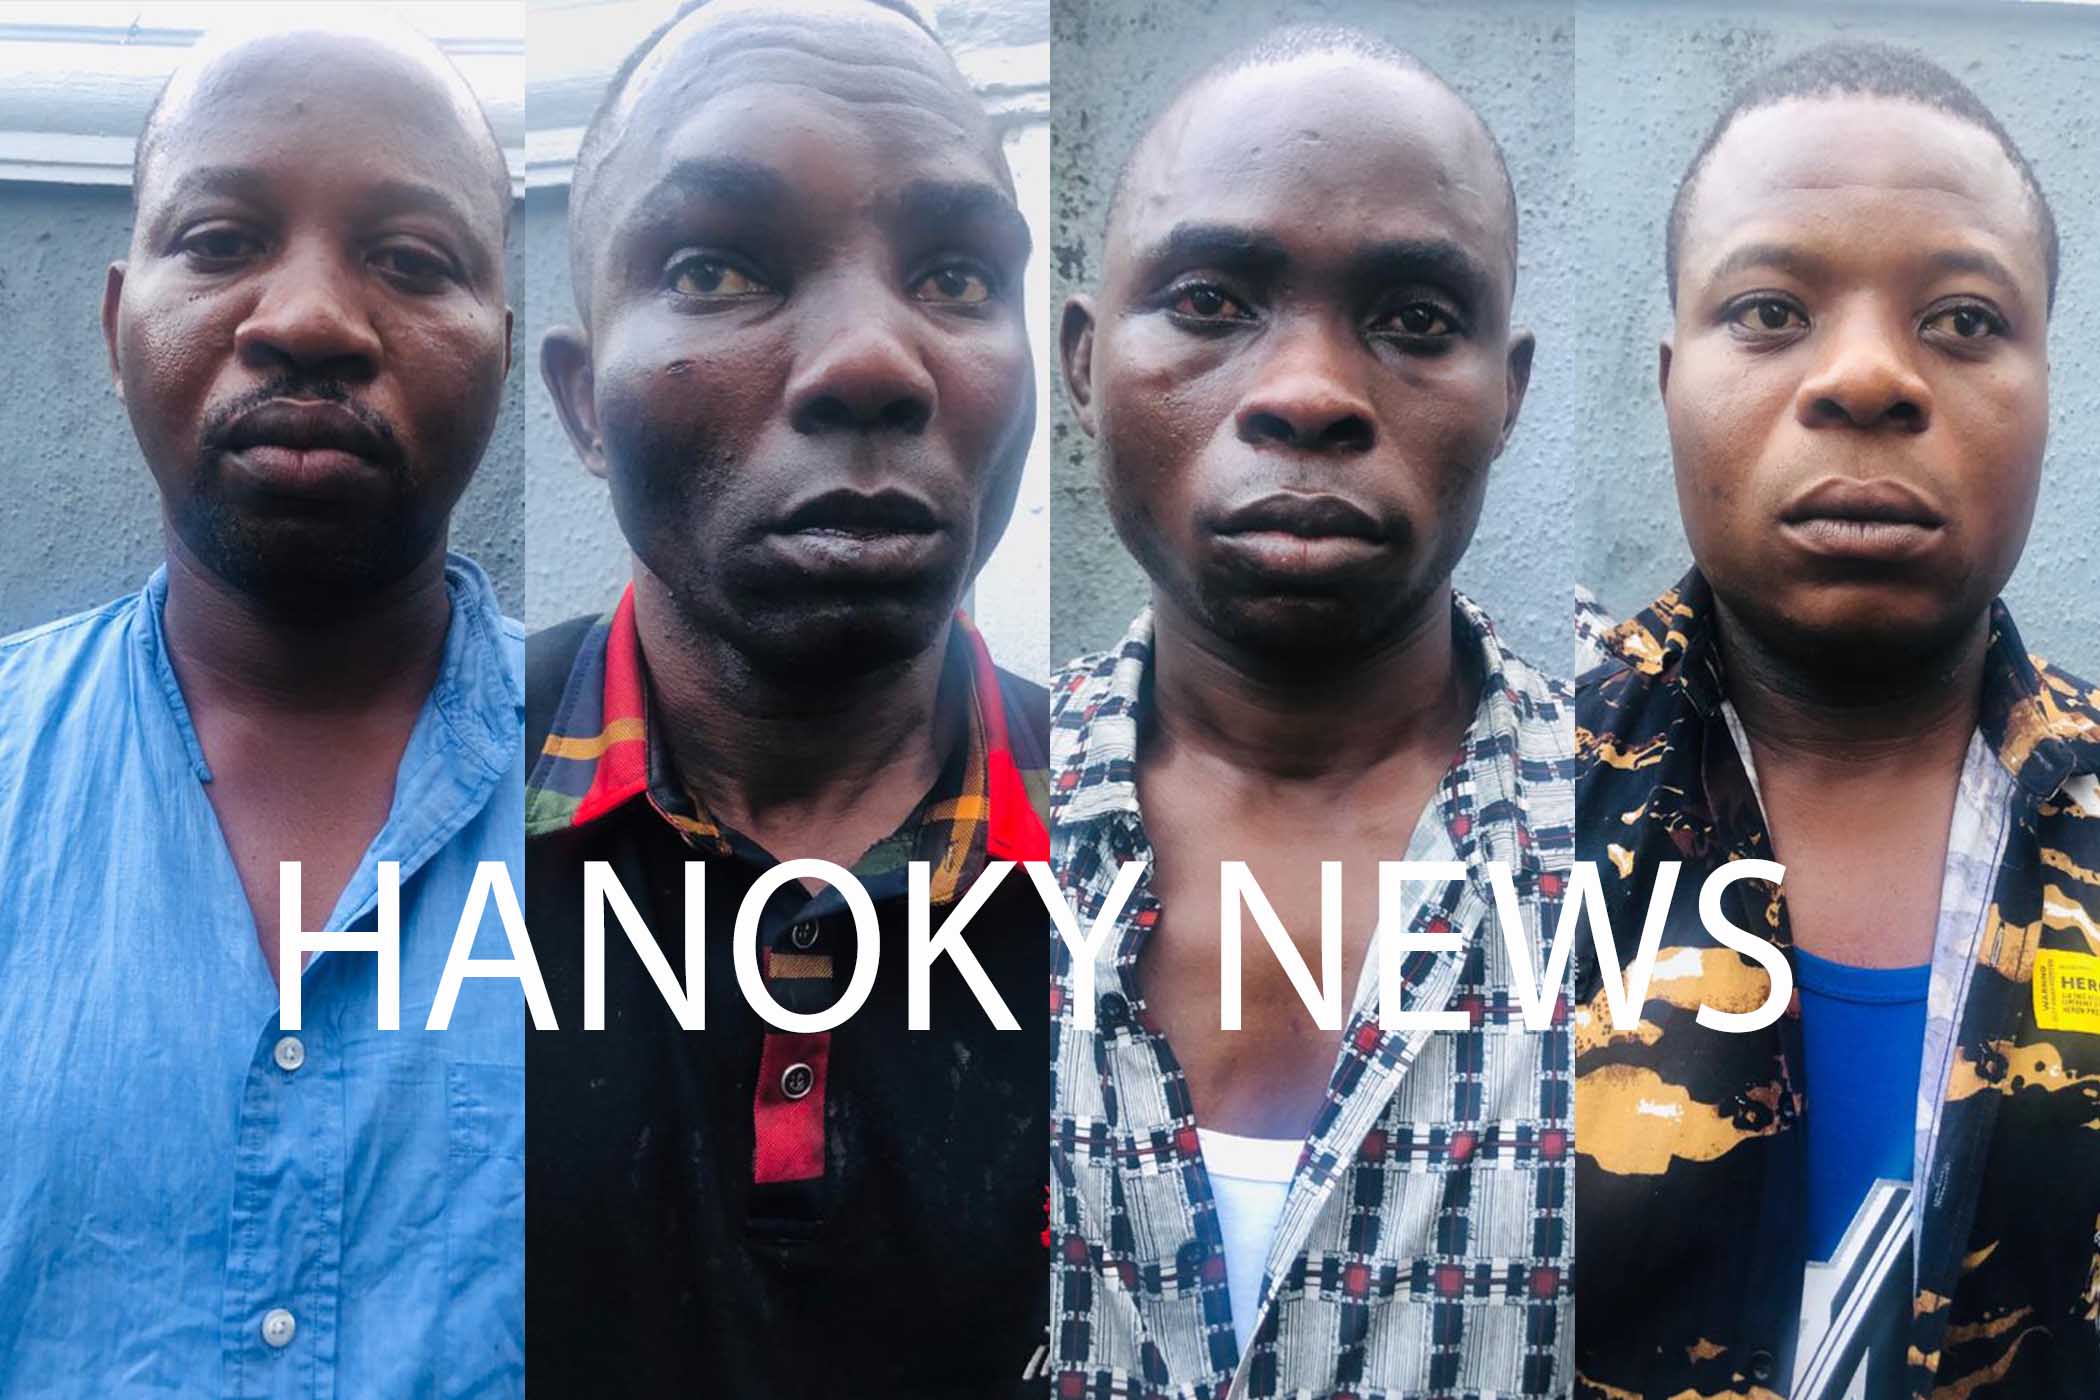 Police nab killers of 4 police officers in Ebonyi, recover charms, guns and explosives